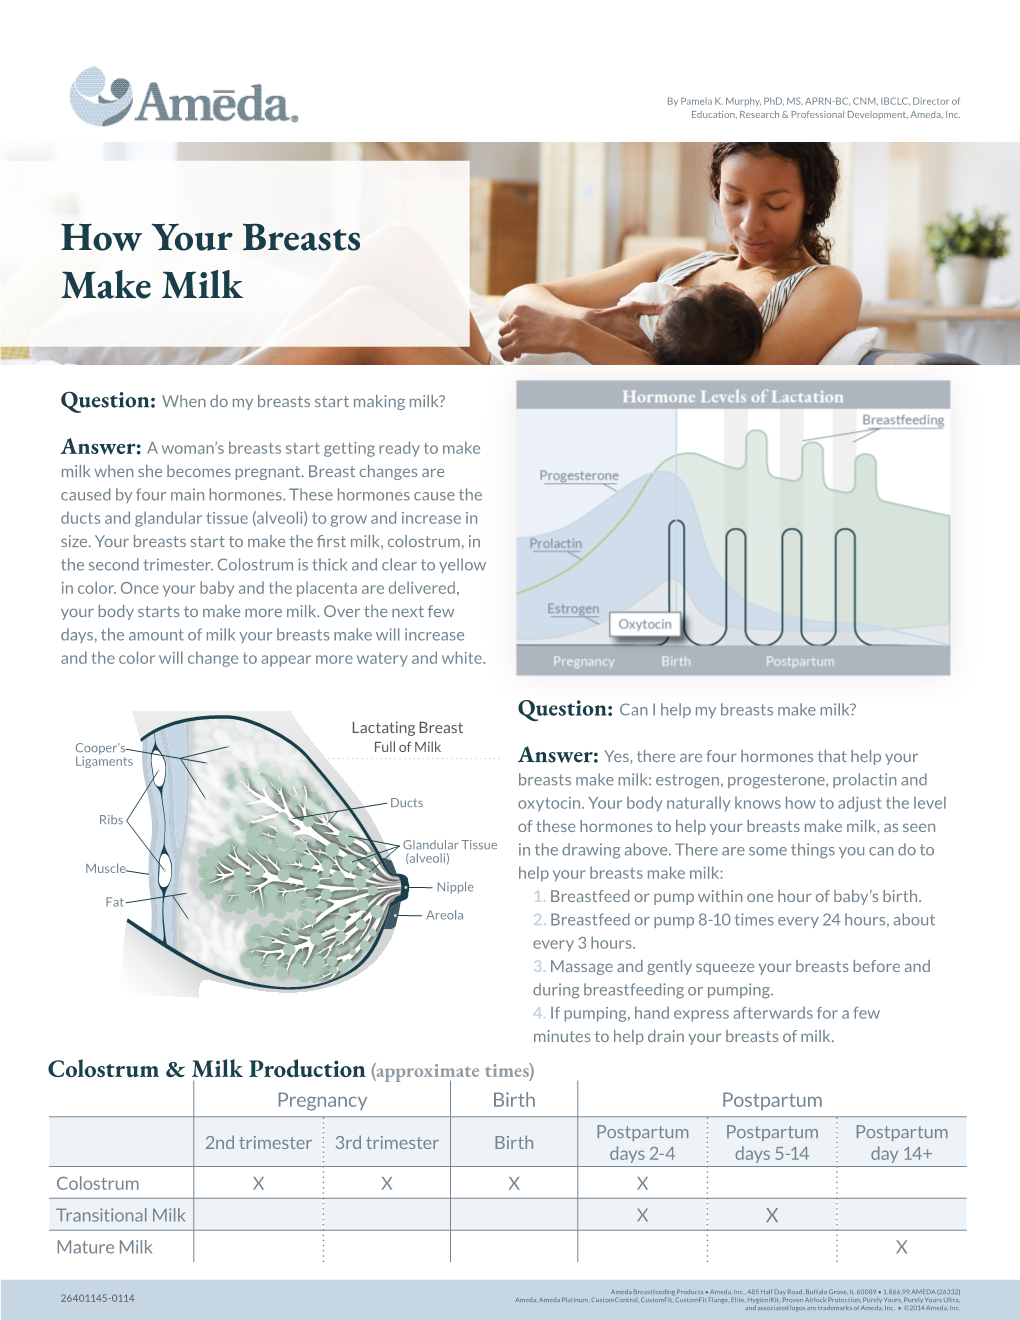 How Your Breasts Make Milk